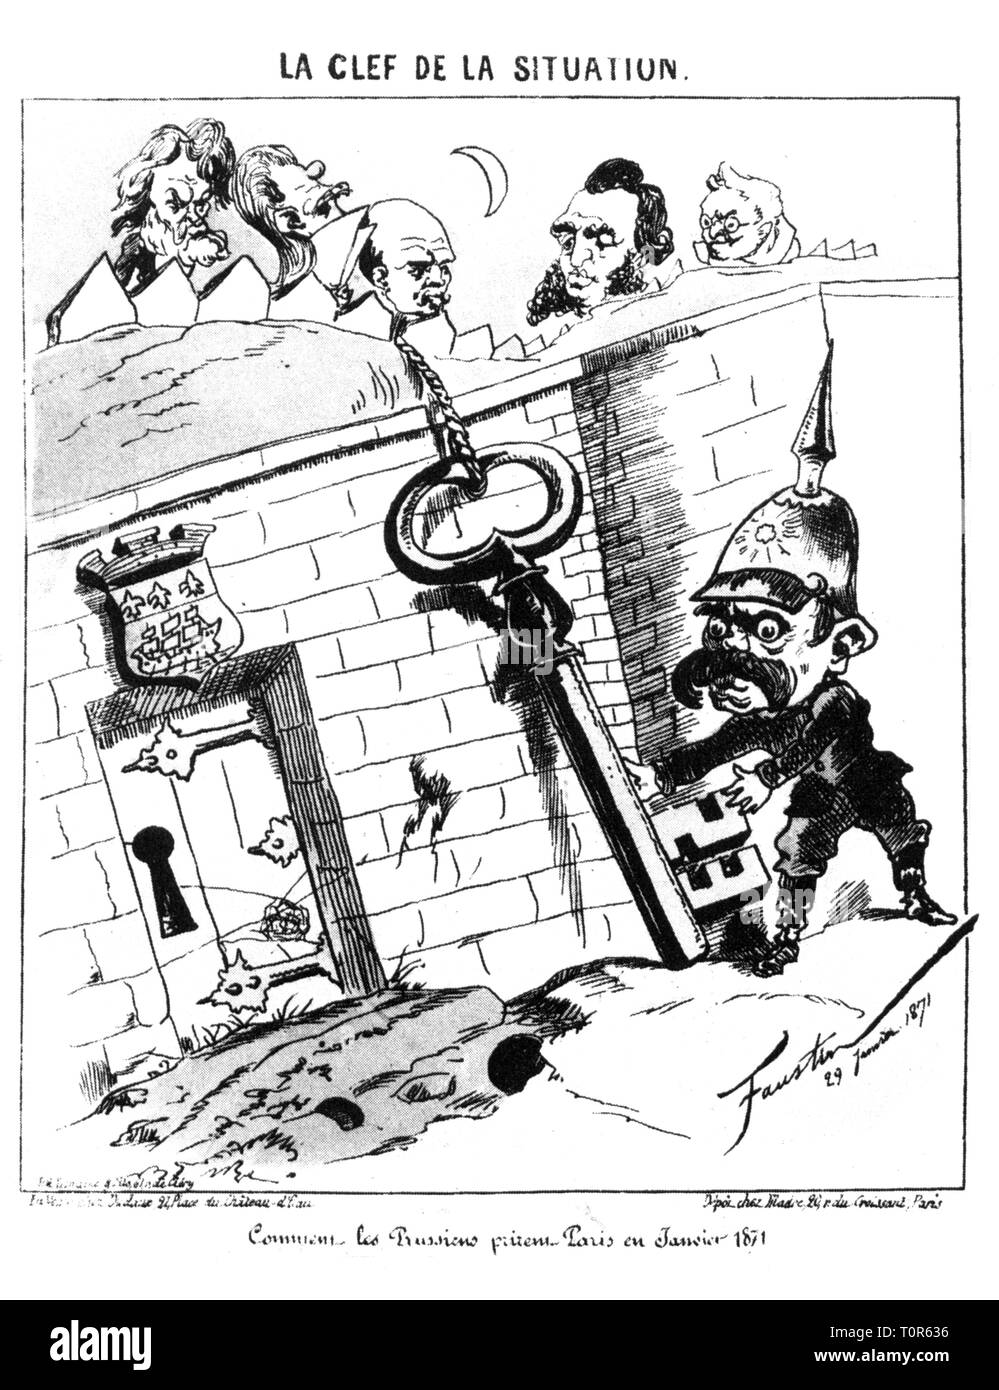 Franco-Prussian War 1870 - 1871, siege of Paris, surrender of the city, caricature, 'The Key to the Situation', drawing by Faustin (Faustin Betbeder), broadsheet, 29.1.1871, satire, caricature, caricatures, cartoon, cartoons, France, Third Republic, Prussia, capitulation, Prime Minister Otto von Bismarck, foreign minister Jules Favre, minister Etienne Garnier-Pages, Garnier - Pages, governor-general general Louis Jules Trochu, mayor Jules Ferry, Adolphe Thiers, night, city wall, city walls, city gate, city gates, German - French, people, men, man, Additional-Rights-Clearance-Info-Not-Available Stock Photo